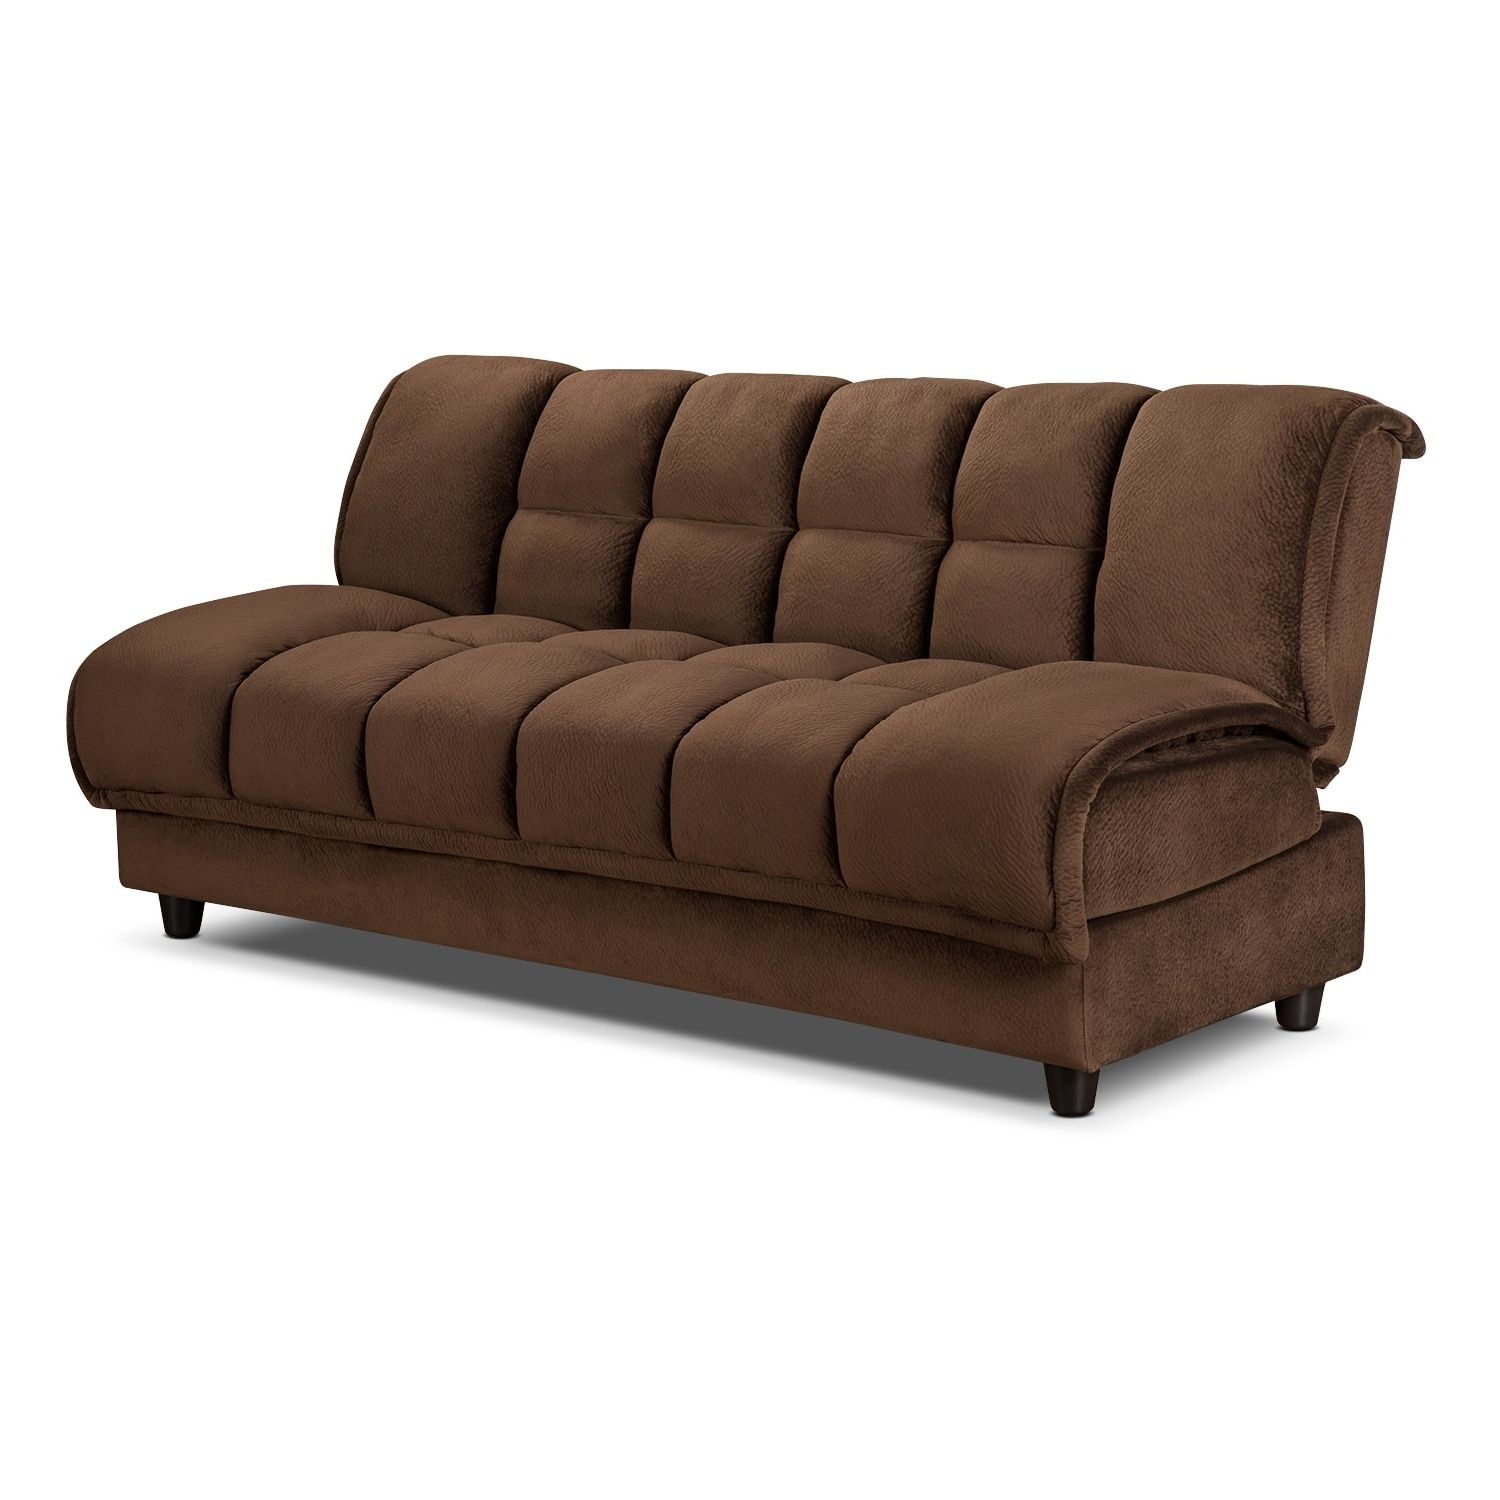 Newest Tallahassee Sectional Sofas Intended For Furniture: Cheap Sectional Sofas Under  (View 7 of 15)